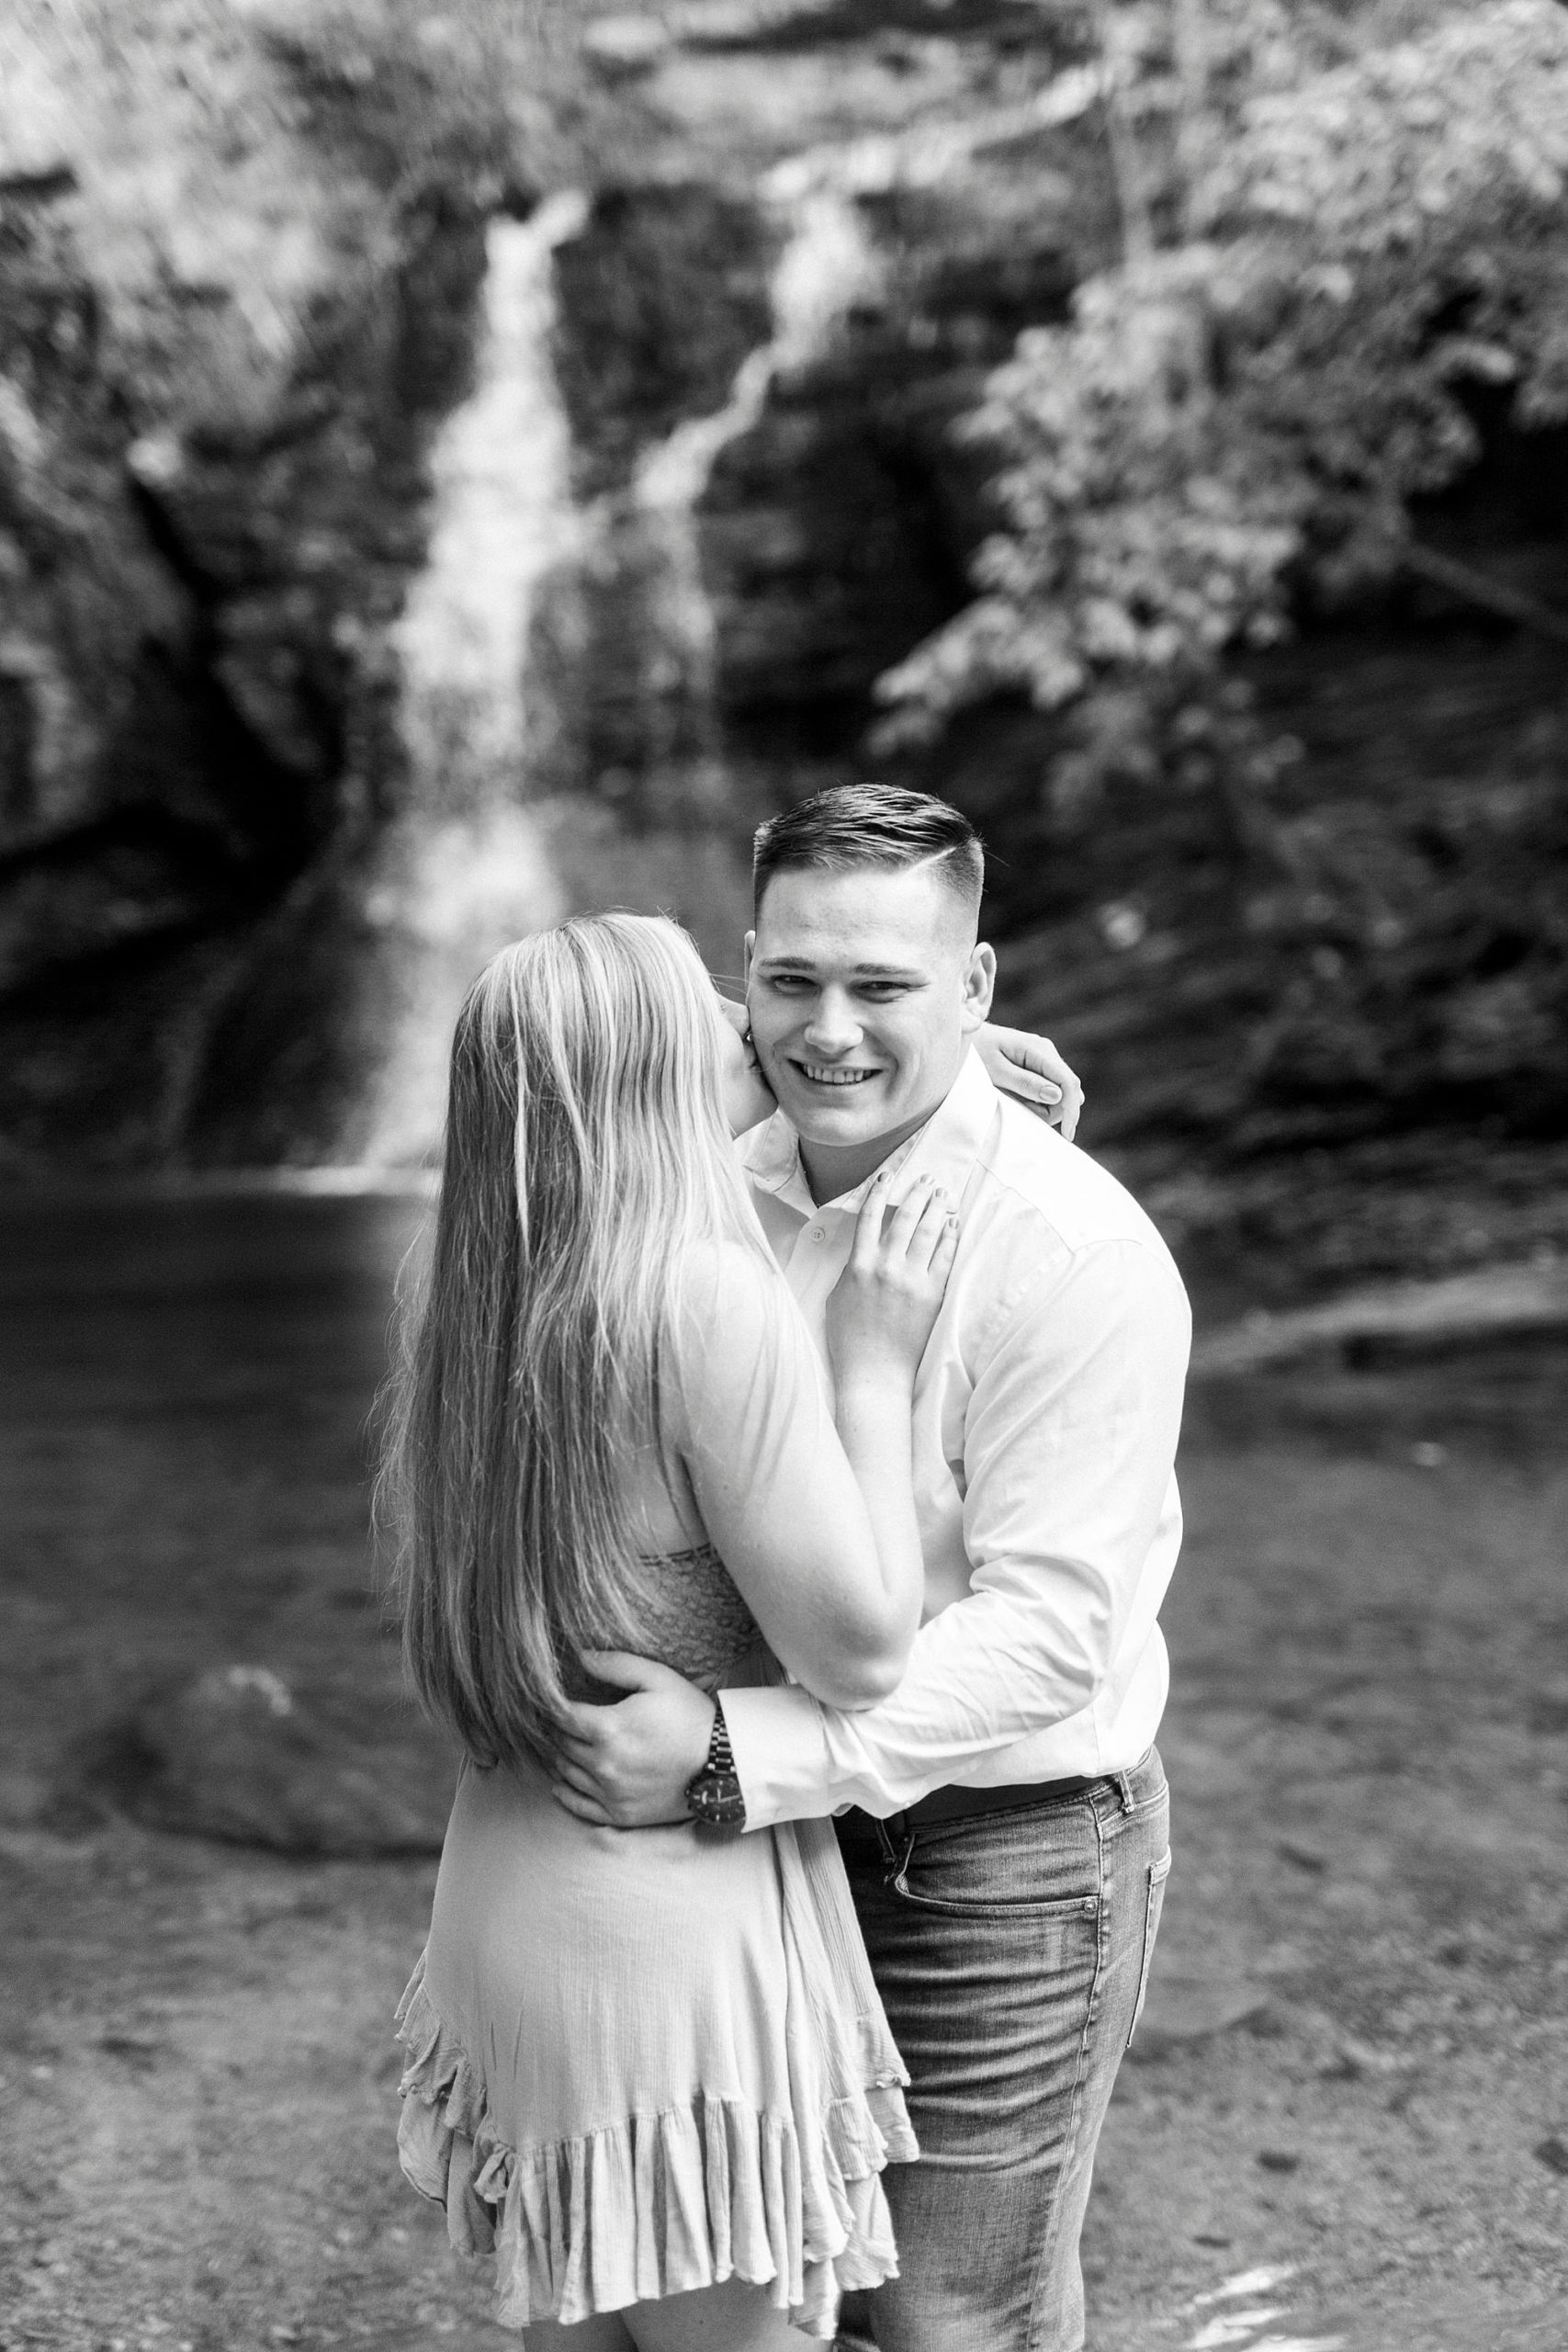 bride and groom hug in waterfall during photos in Lower Cascades